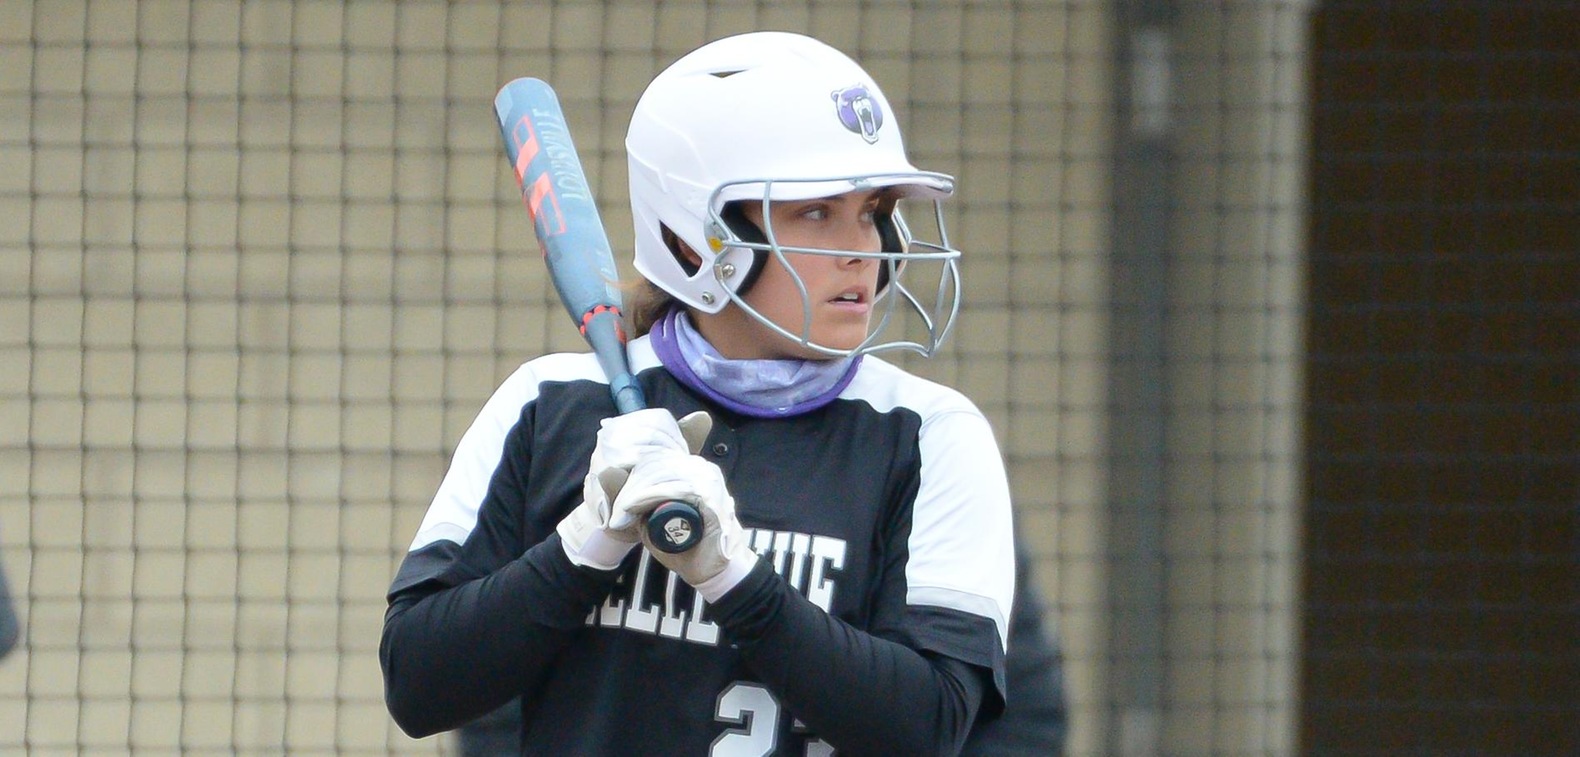 Lauren Russell went 4-for-6 with two home runs and five RBIs on the day.